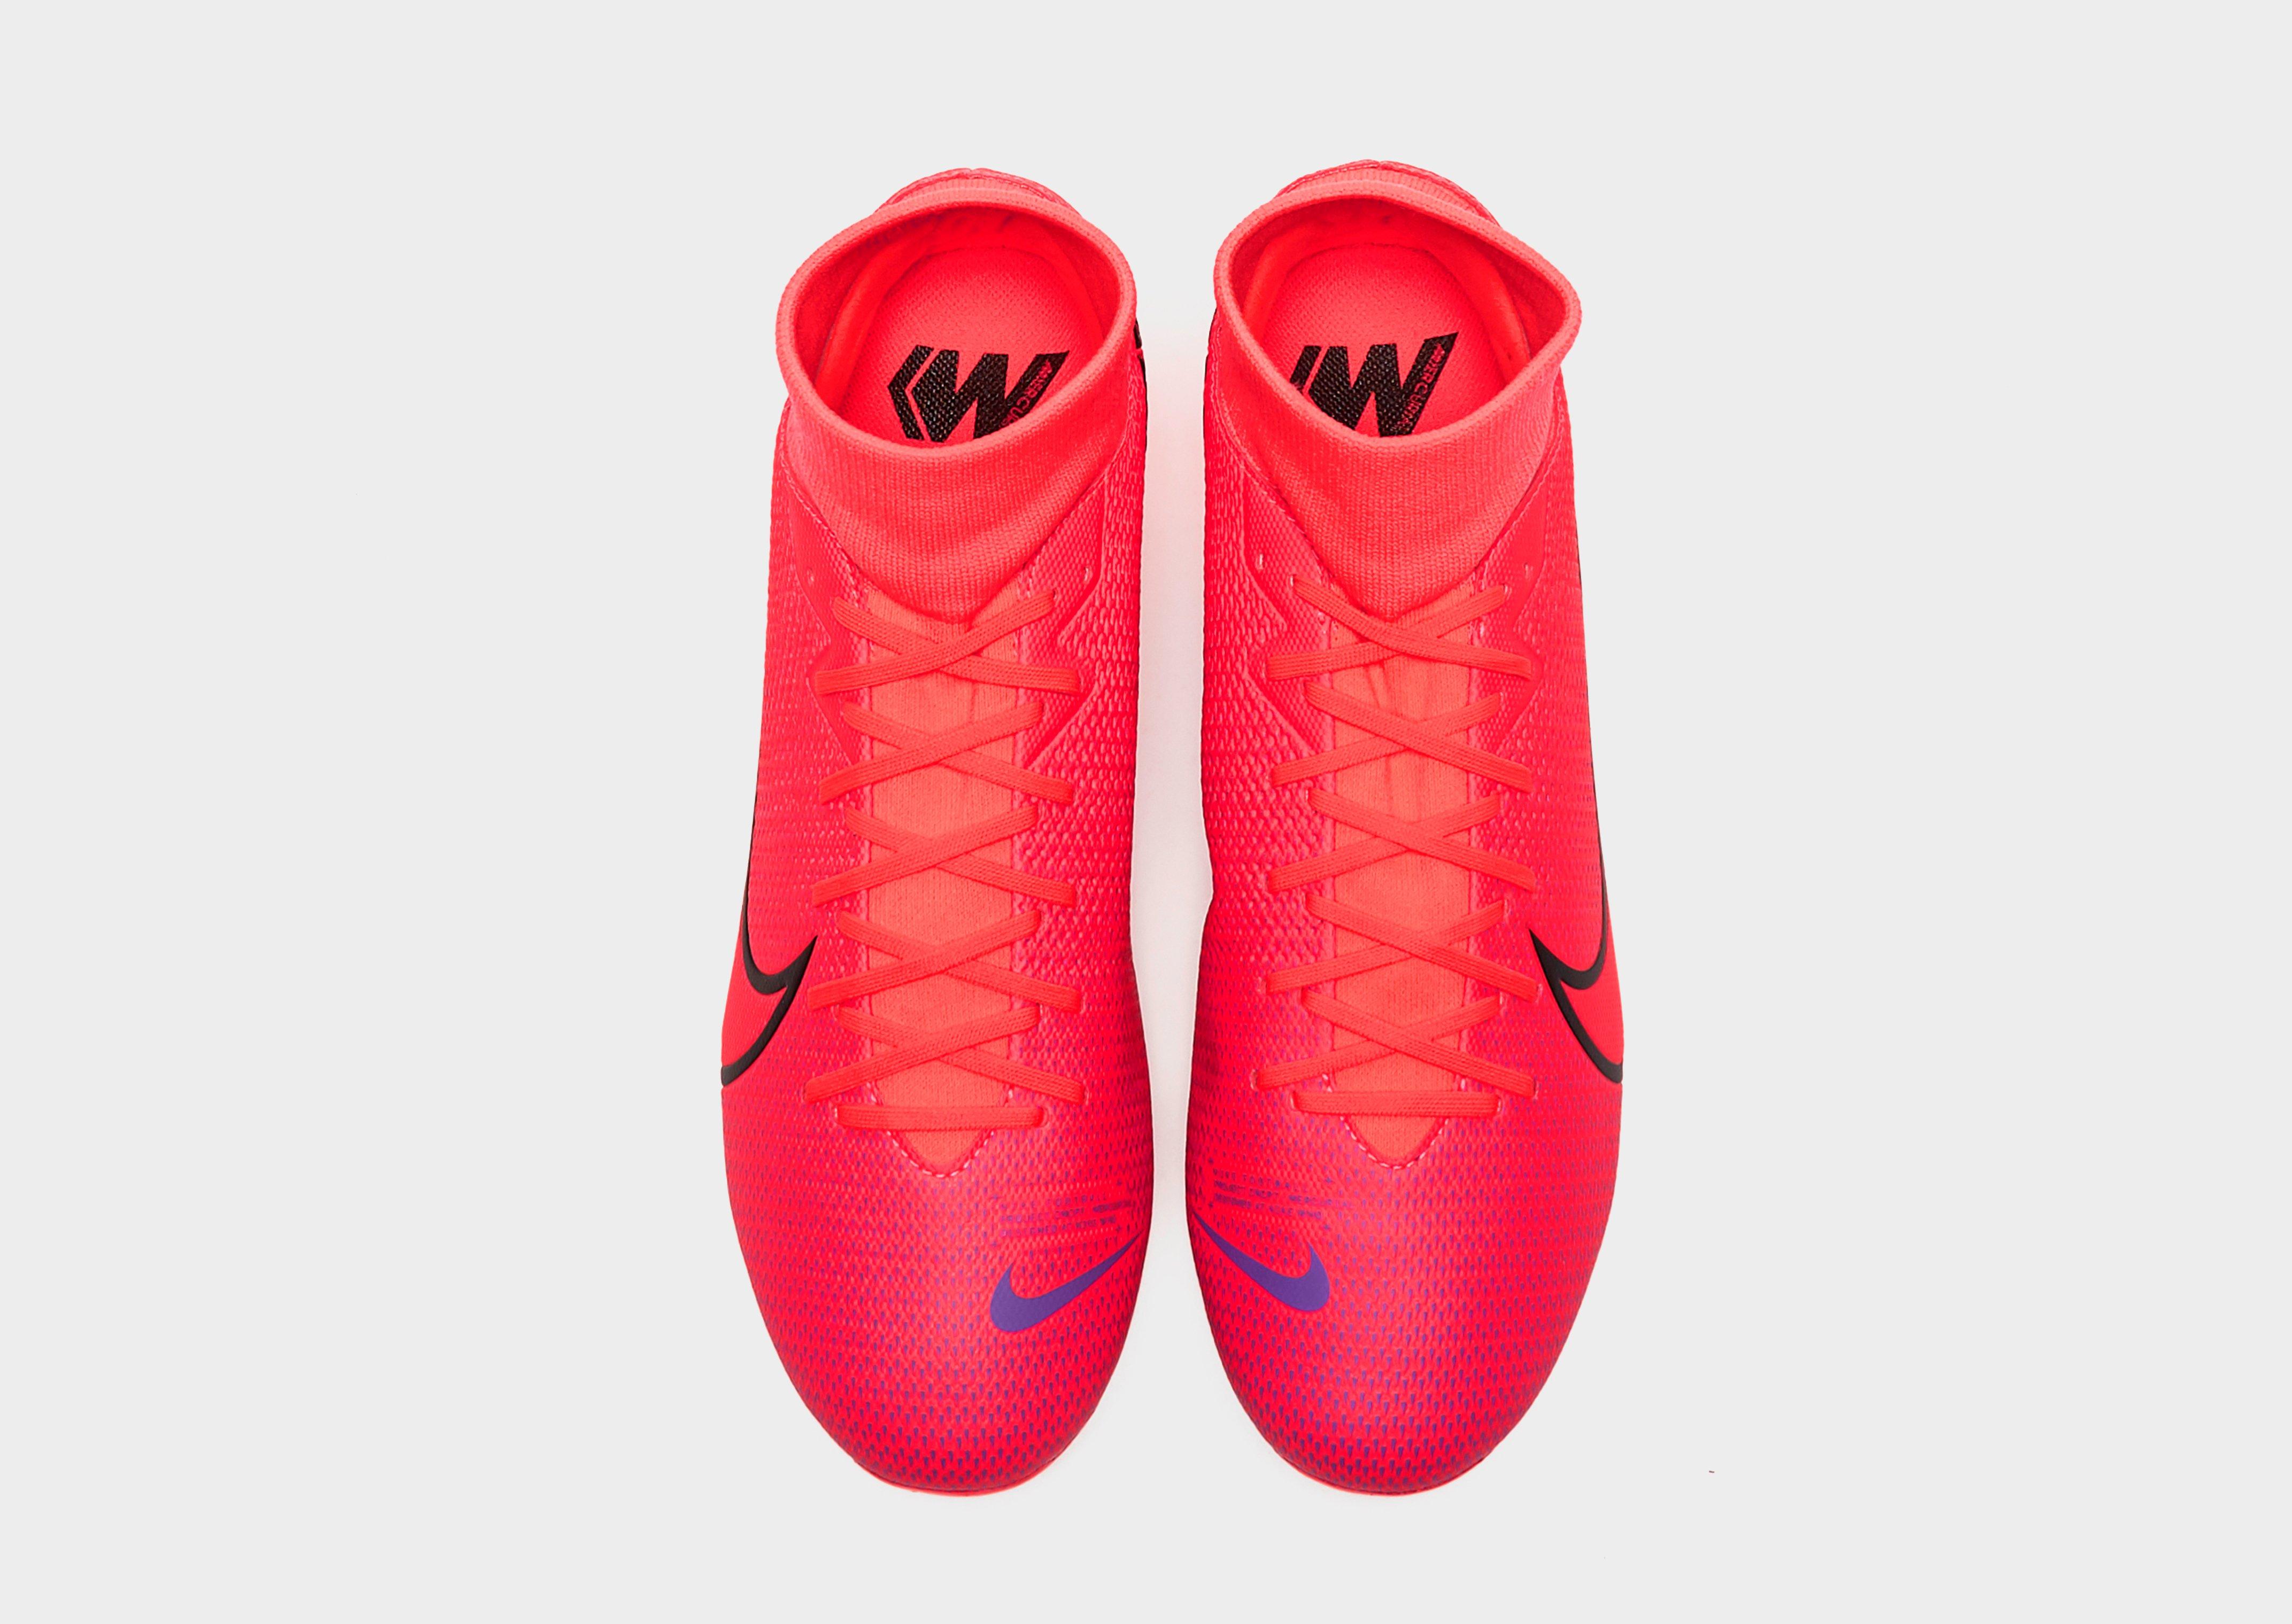  NIKE Official Nike Mercurial Superfly 7 Academy MDS TF.